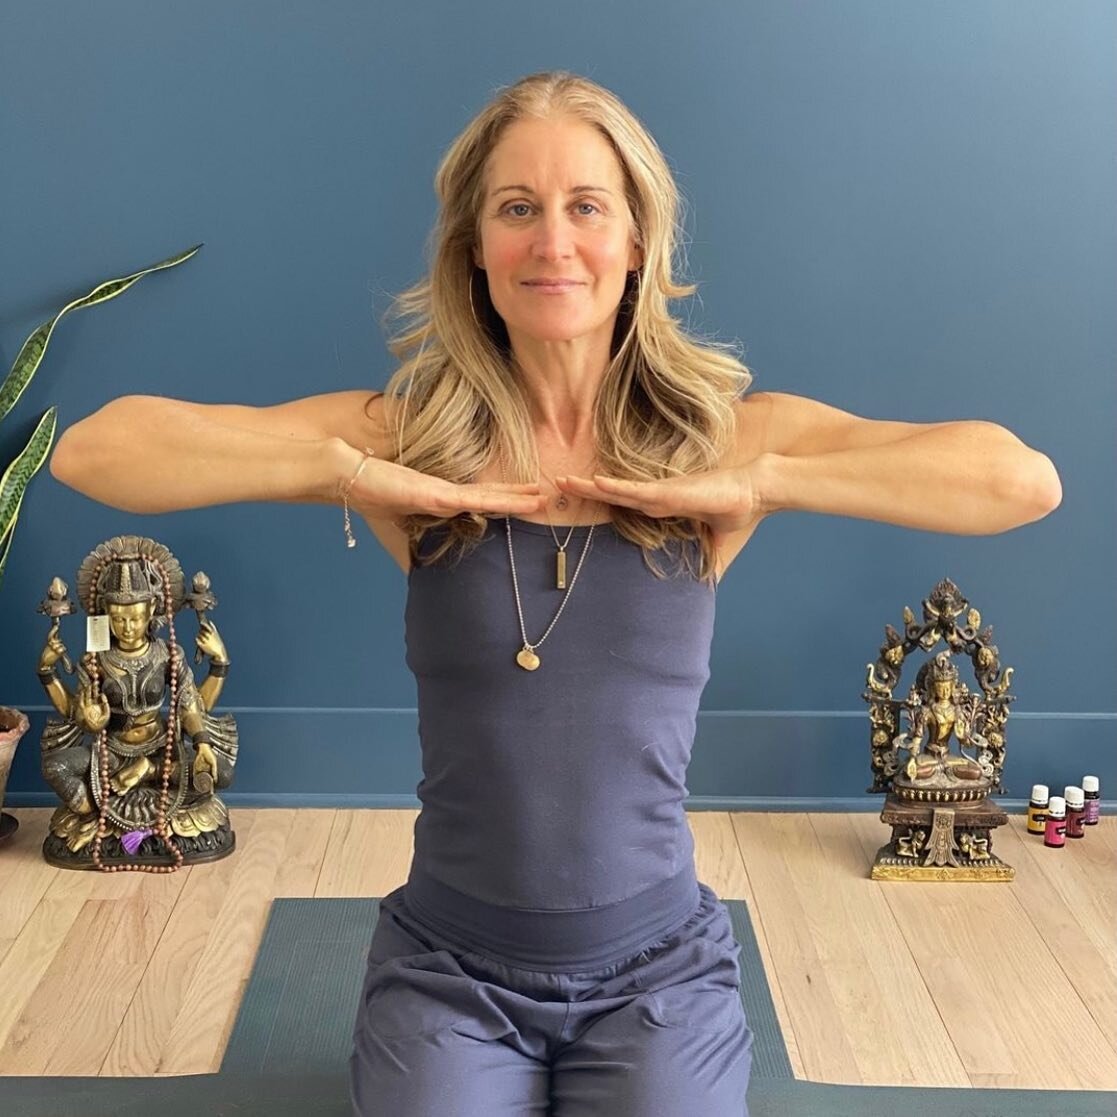 🙏𝙄𝙩&rsquo;𝙨 #𝙈𝙪𝙙𝙧𝙖𝙈𝙤𝙣𝙙𝙖𝙮! 🙏⁣⁣⠀
⁠⁣⁣⠀
This week we take a look at one of the Sharira Mudras, Madhyama Sharira Mudra - the Gesture of the Middle Body. ⁠⁣⁣⠀
⁠⁣⁣⠀
Madhyama means &ldquo;middle&rdquo; and Sharira means &ldquo;body&rdquo; and